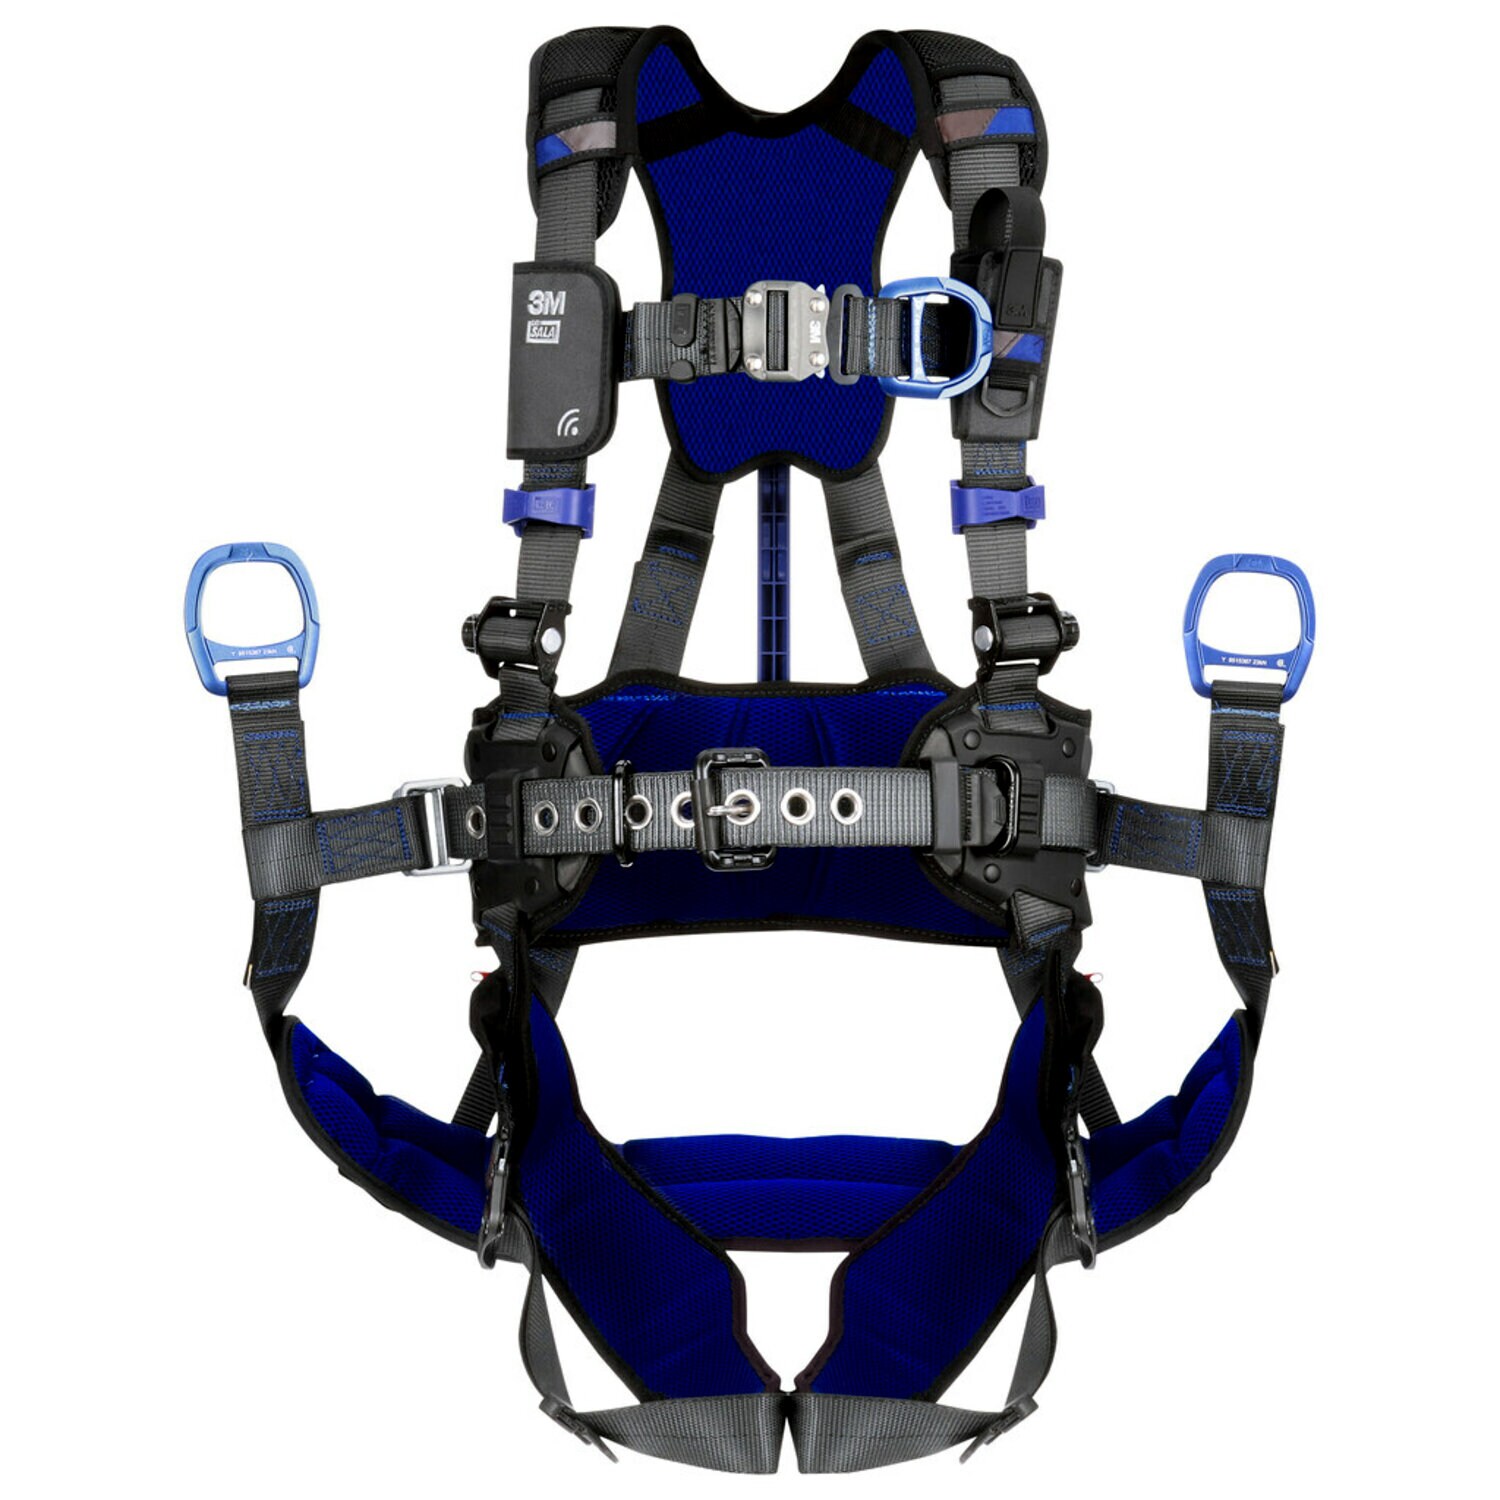 7012818059 - 3M DBI-SALA ExoFit X300 Comfort Tower Climbing/Suspension Safety Harness with Weight Bar 1403236, 2X